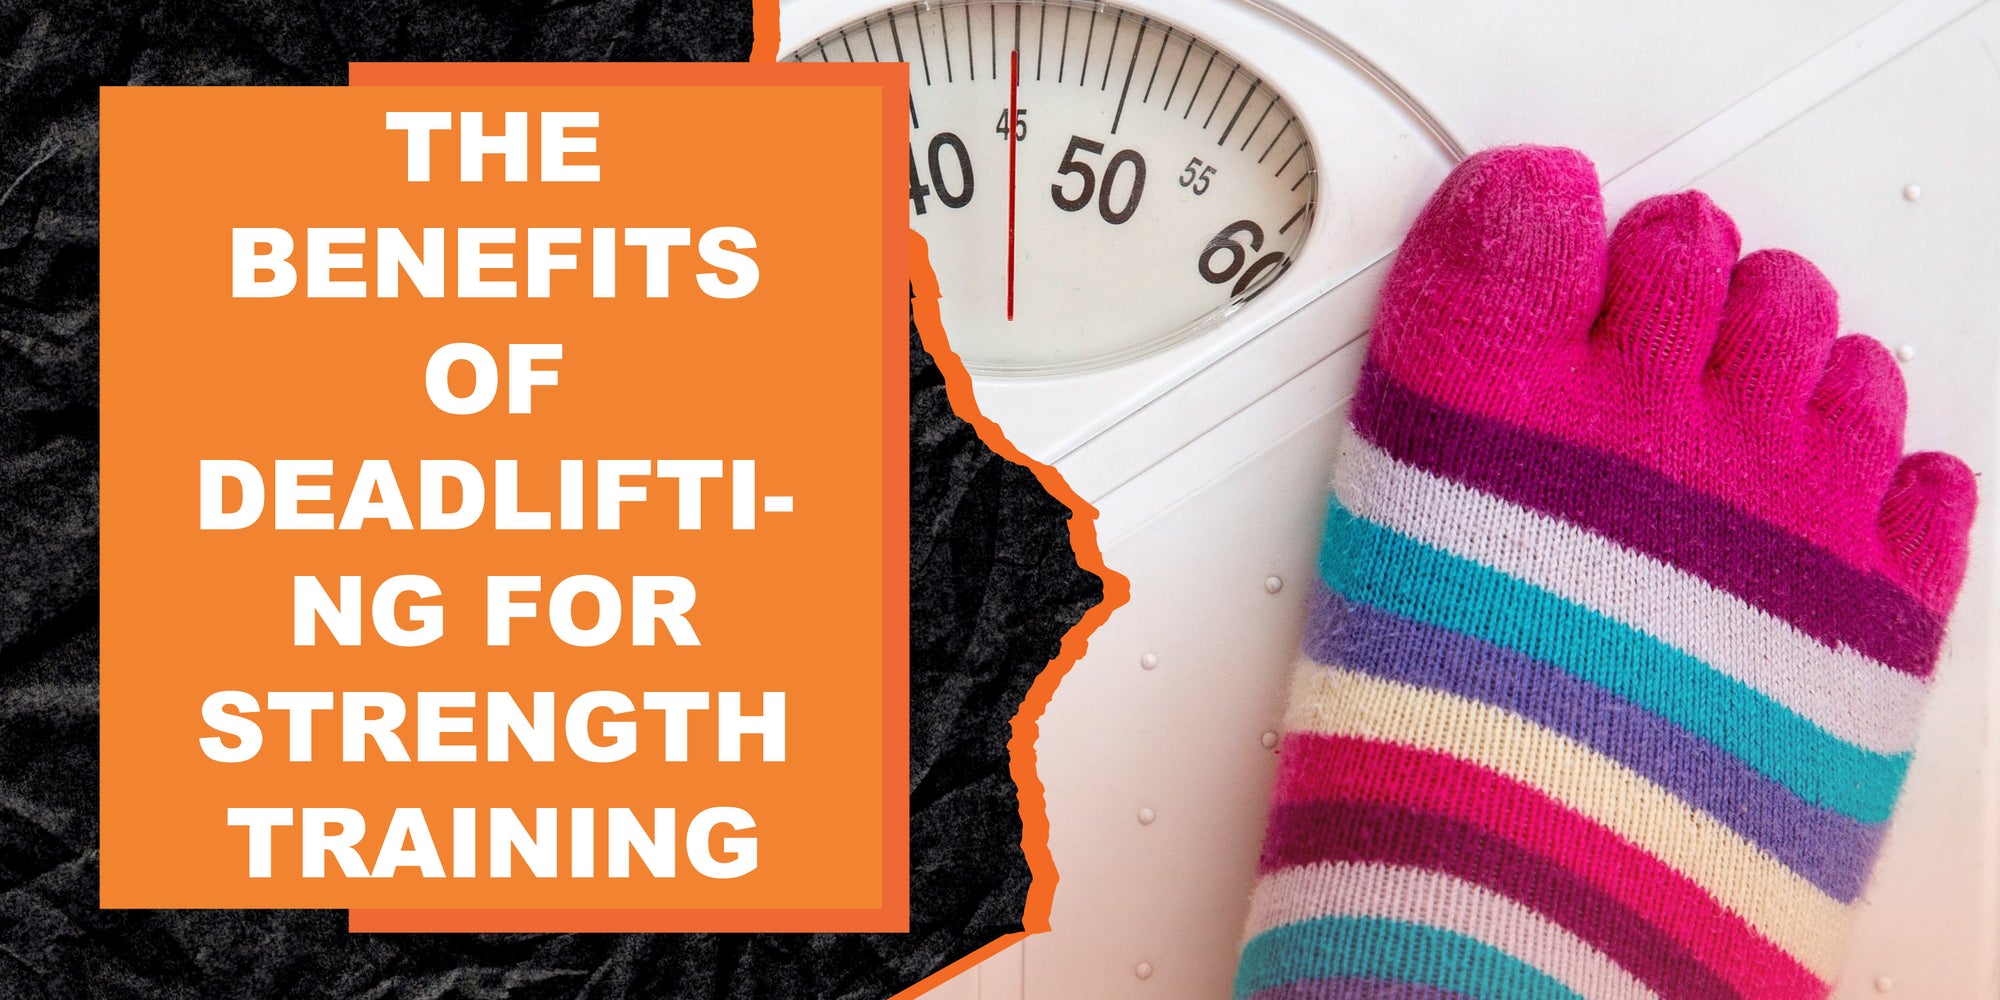 The Benefits of Deadlifting for Strength Training